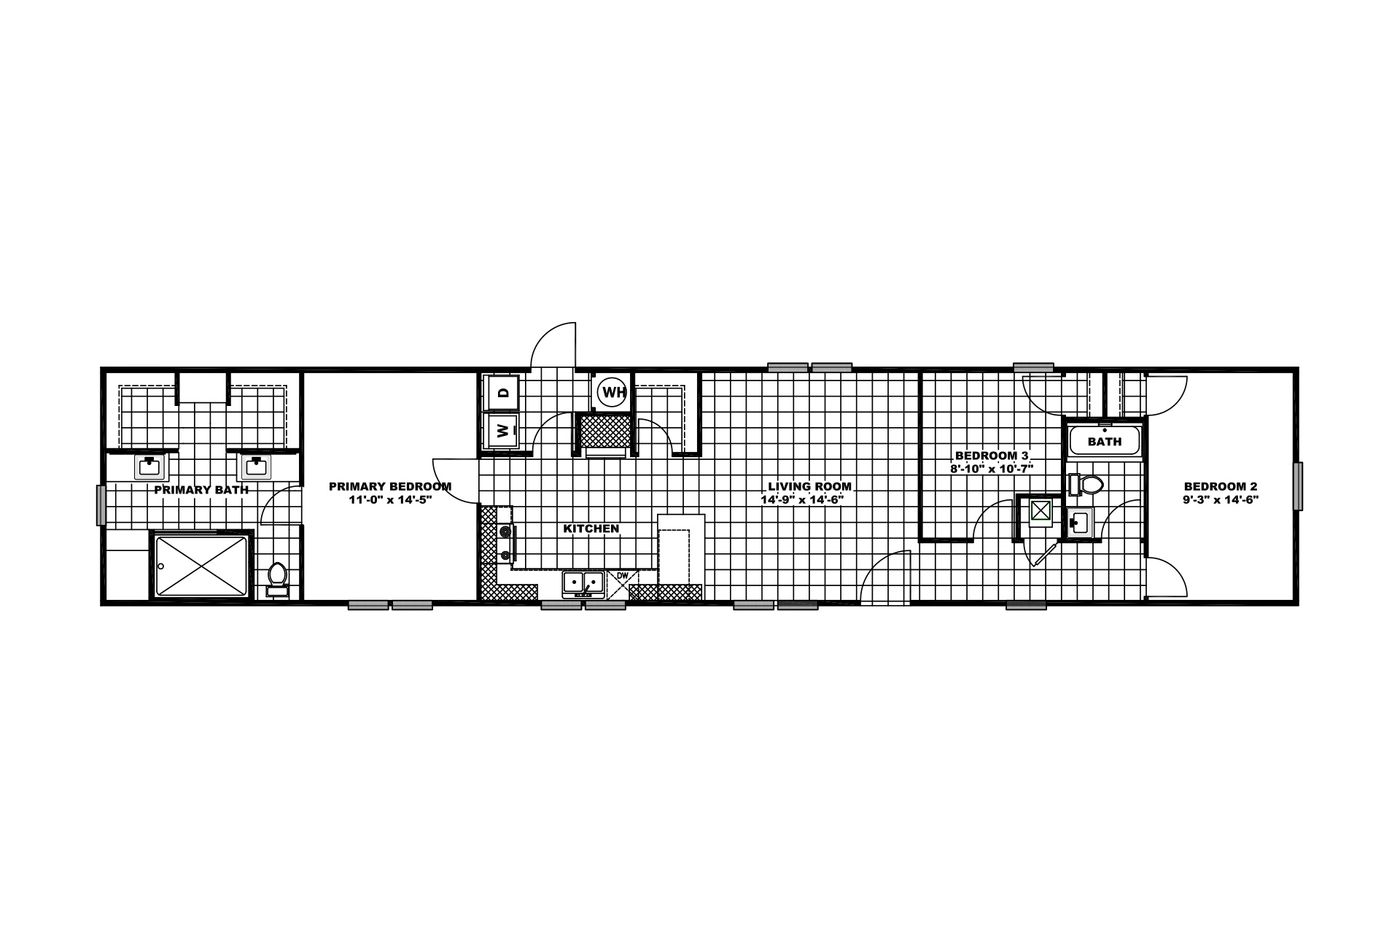 The THE 1959 Floor Plan. This Manufactured Mobile Home features 3 bedrooms and 2 baths.